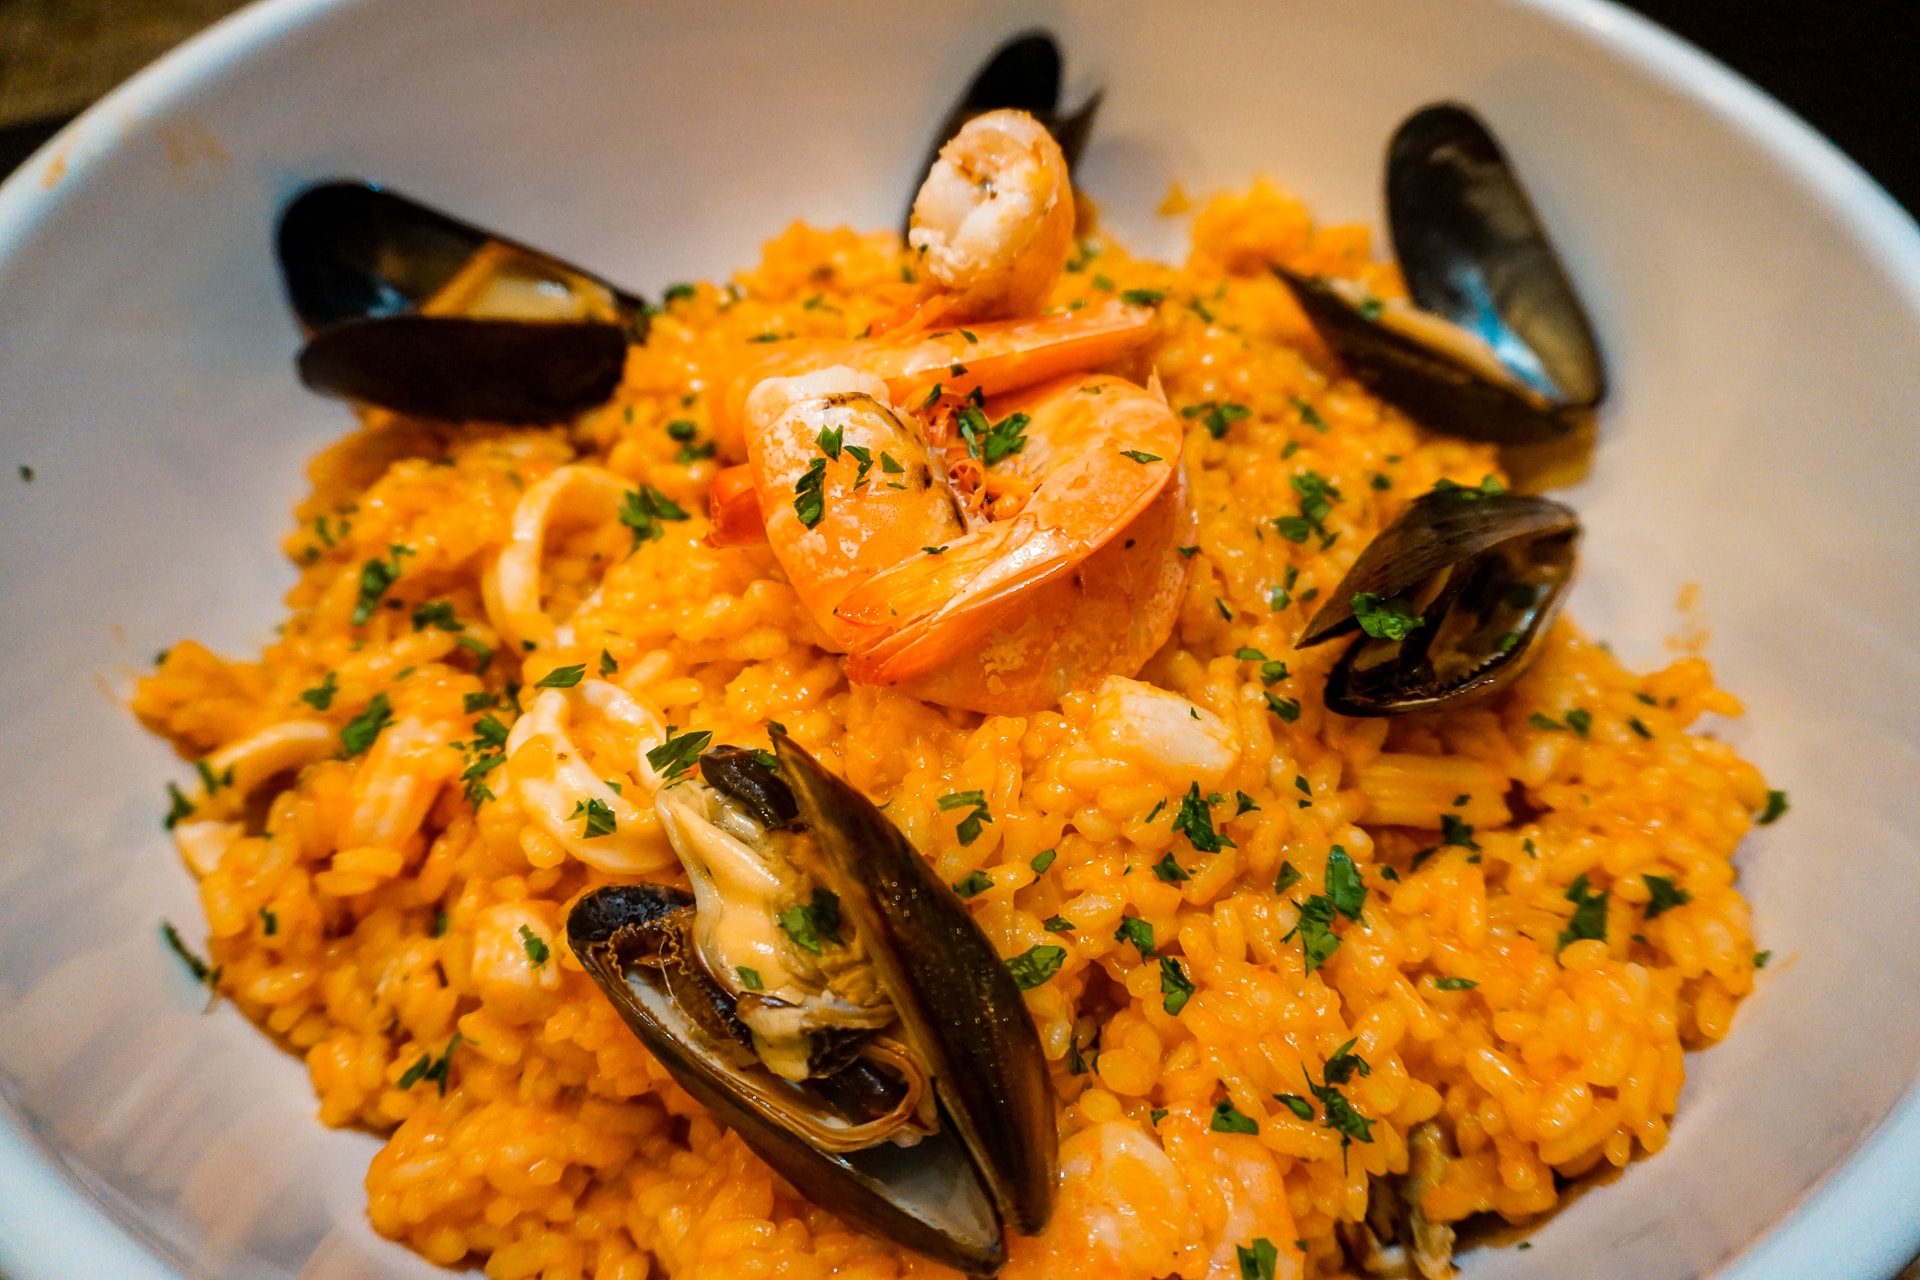 Authentic Seafood Risotto from Southern Italy - Creamy & Delicious Recipe